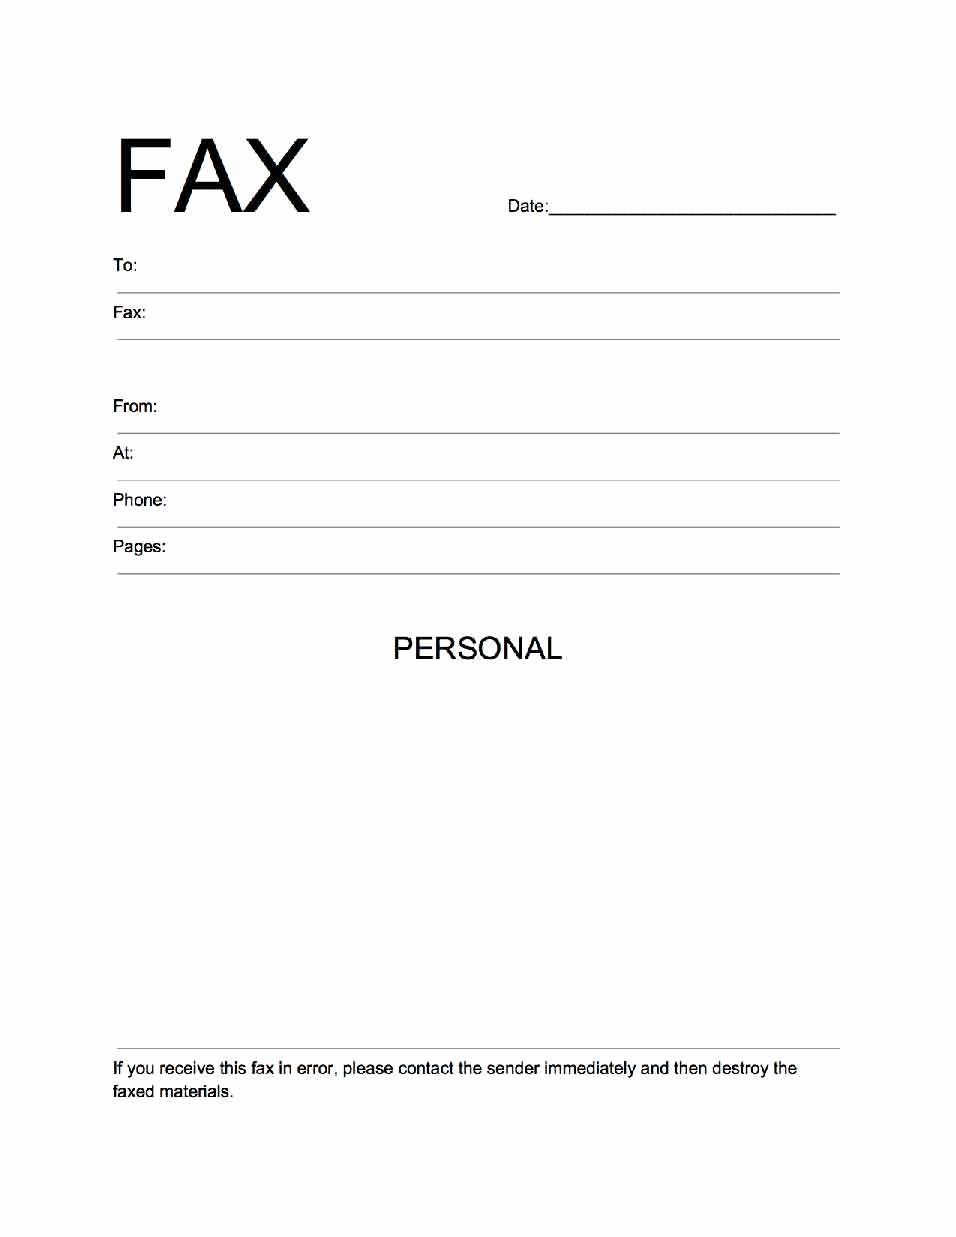 How to Fax Cover Sheet Awesome Fax Cover Sheet Pdf Excel &amp; Word